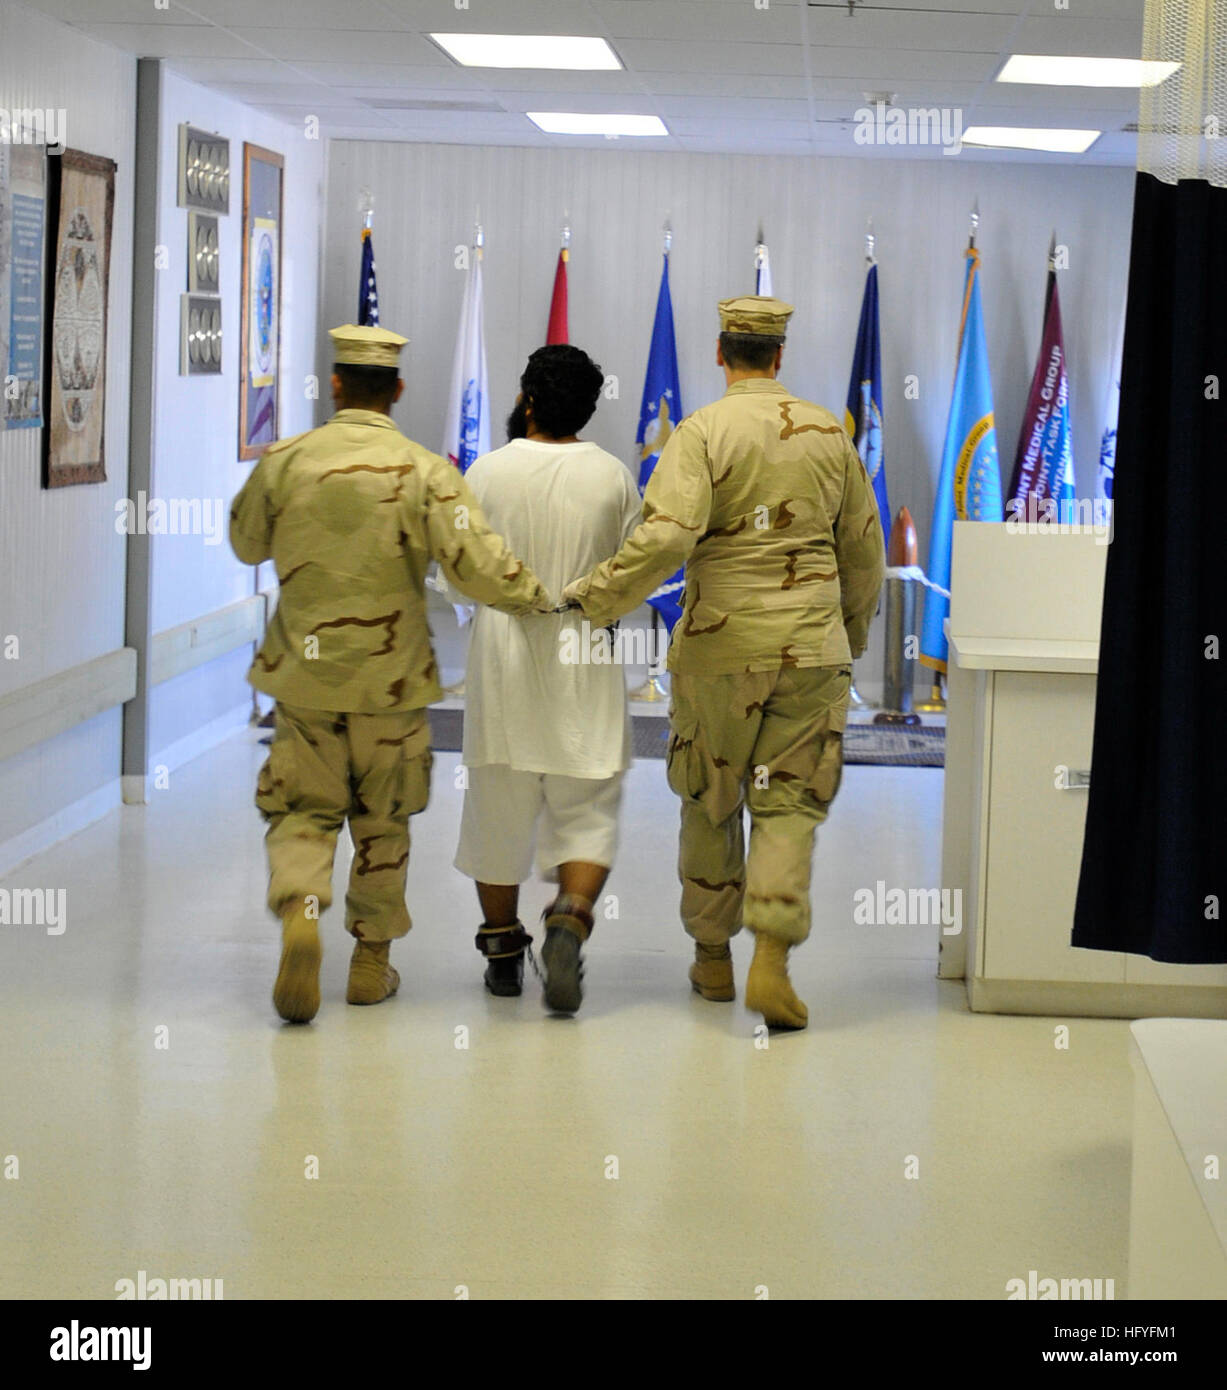 101028-N-3887D-008 GUANTANAMO BAY, Cuba (Oct. 28, 2010) A detainee is escorted to the detainee hospital for patient care by personnel from the Joint Medical Group, which provides medical care to detainees. (U.S. Navy photo by Mass Communication Specialist 2nd Class Elisha Dawkins/Released) US Navy 101028-N-3887D-008 A detainee is escorted to the detainee hospital for patient care by personnel from the Joint Medical Group Stock Photo